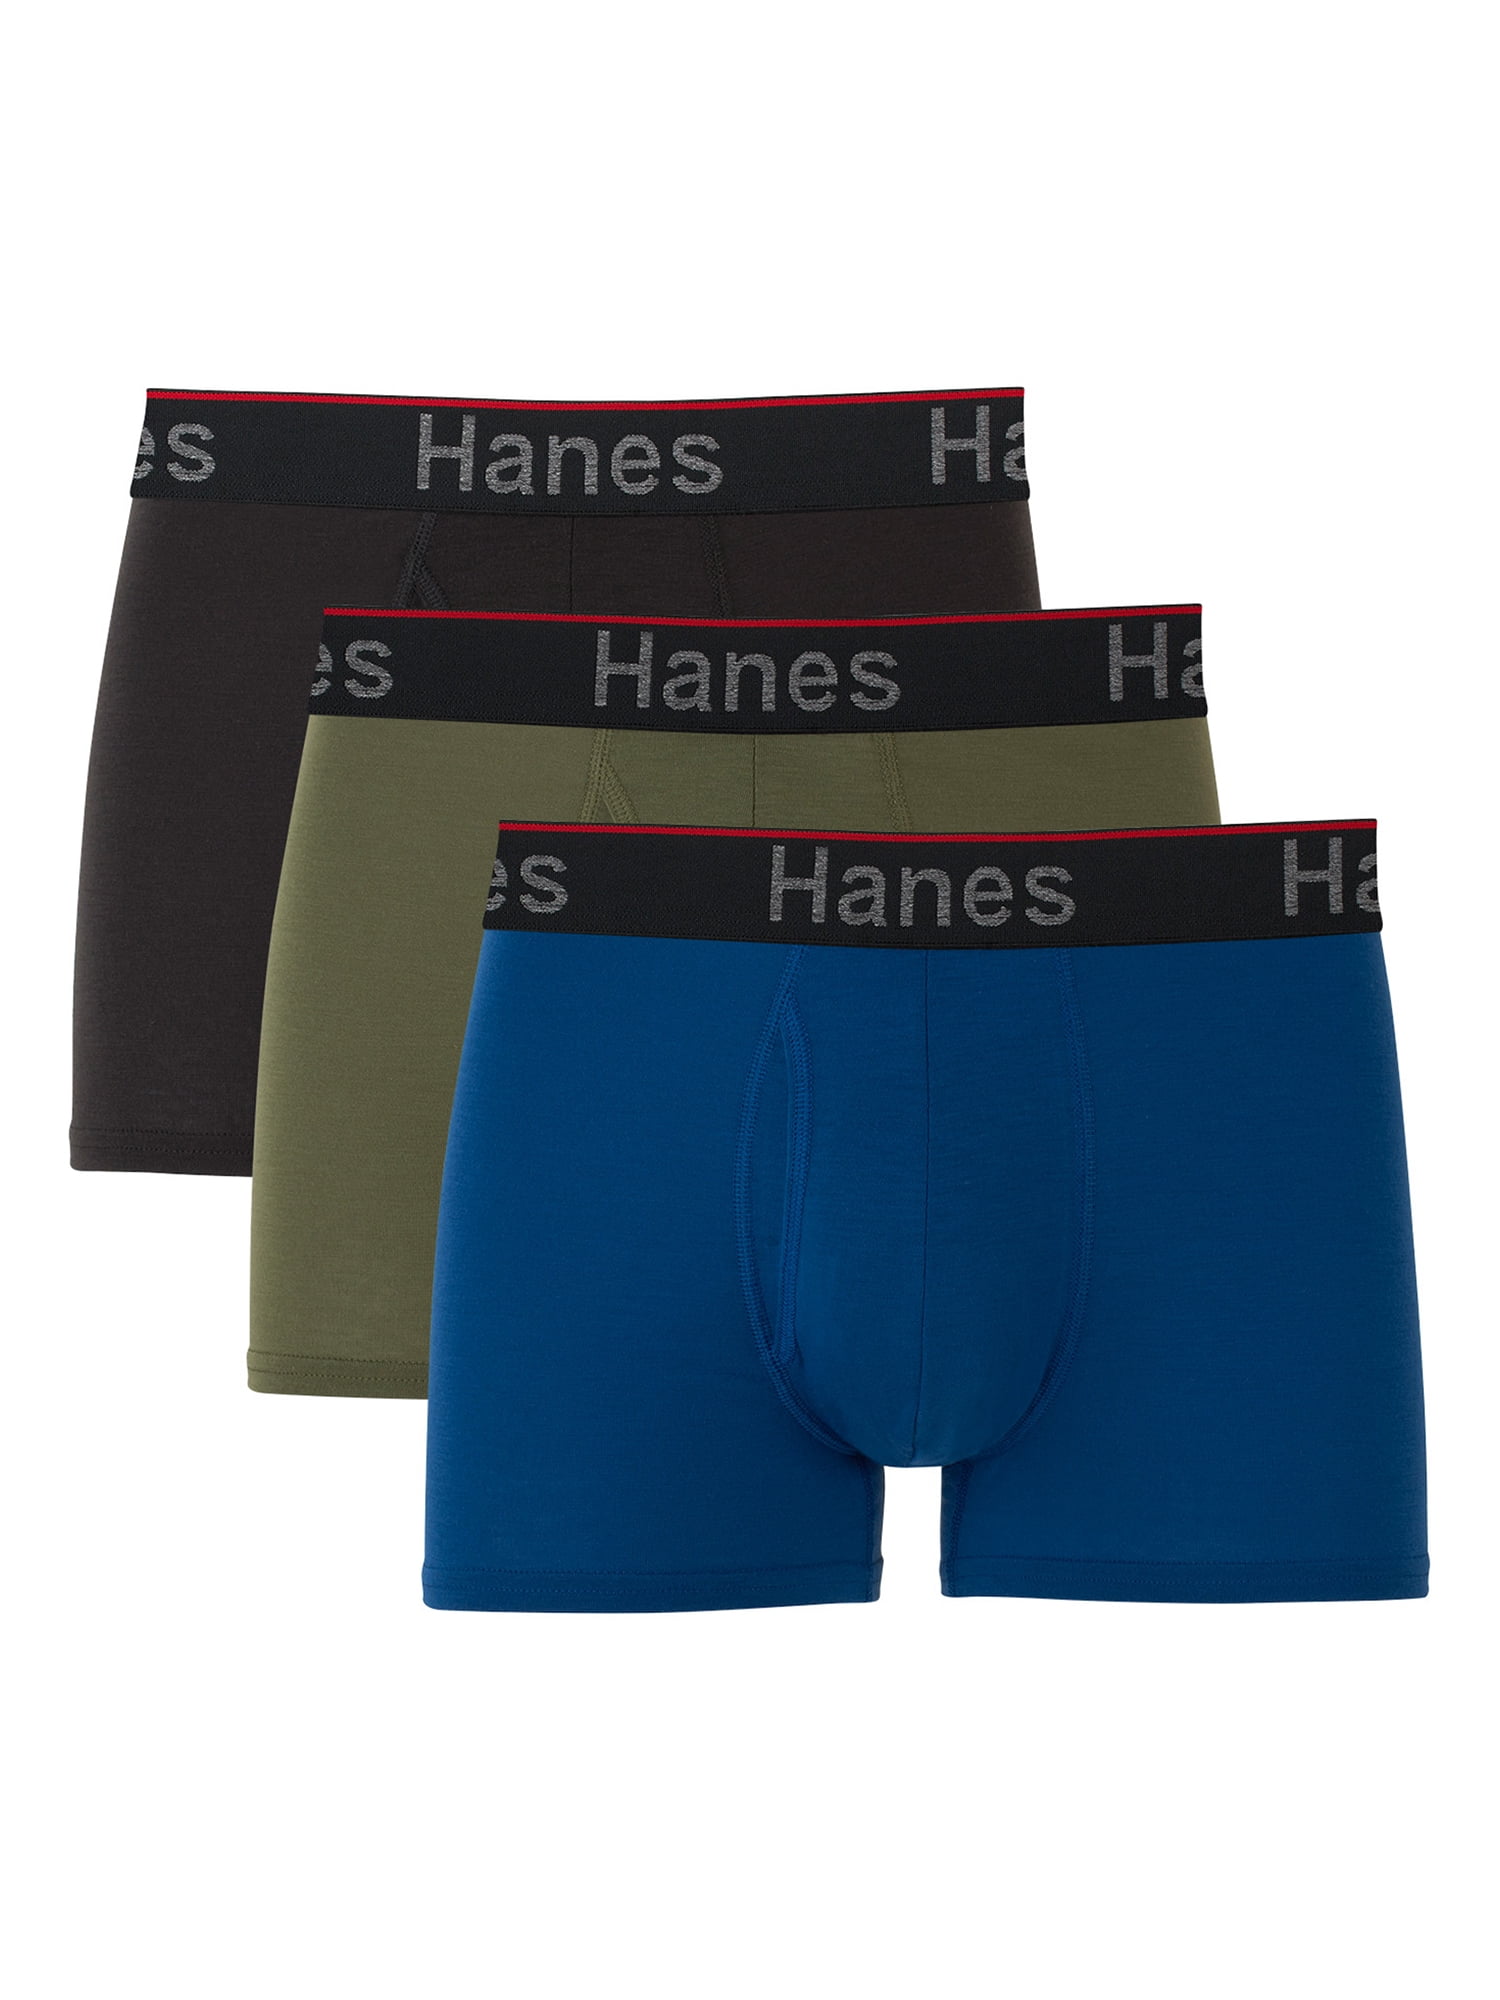 Hanes Total Support Pouch Men's Trunks Pack, Anti-Chafing Underwear ...